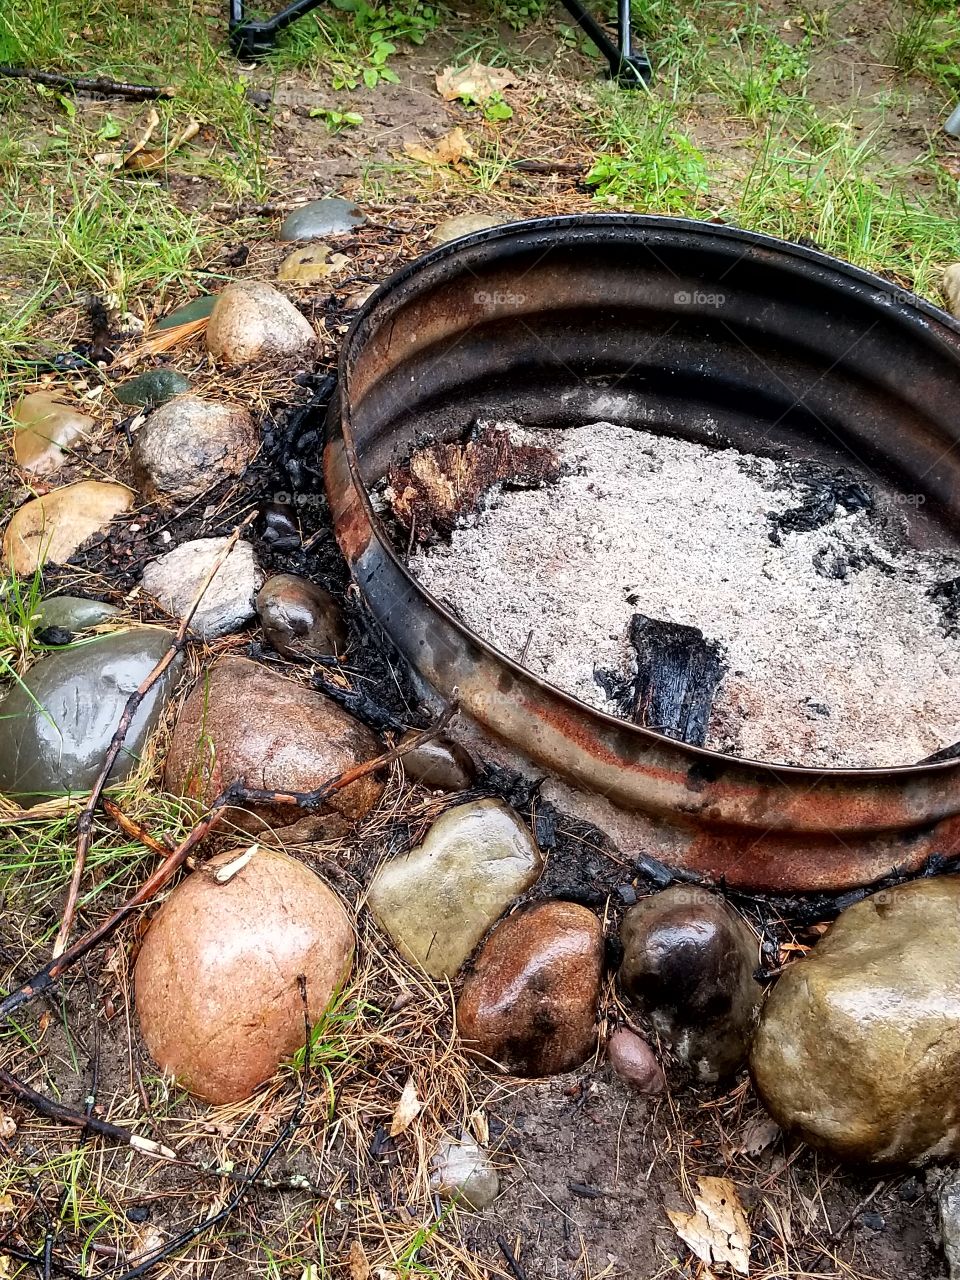 The fire pit was useless on a rainy day.